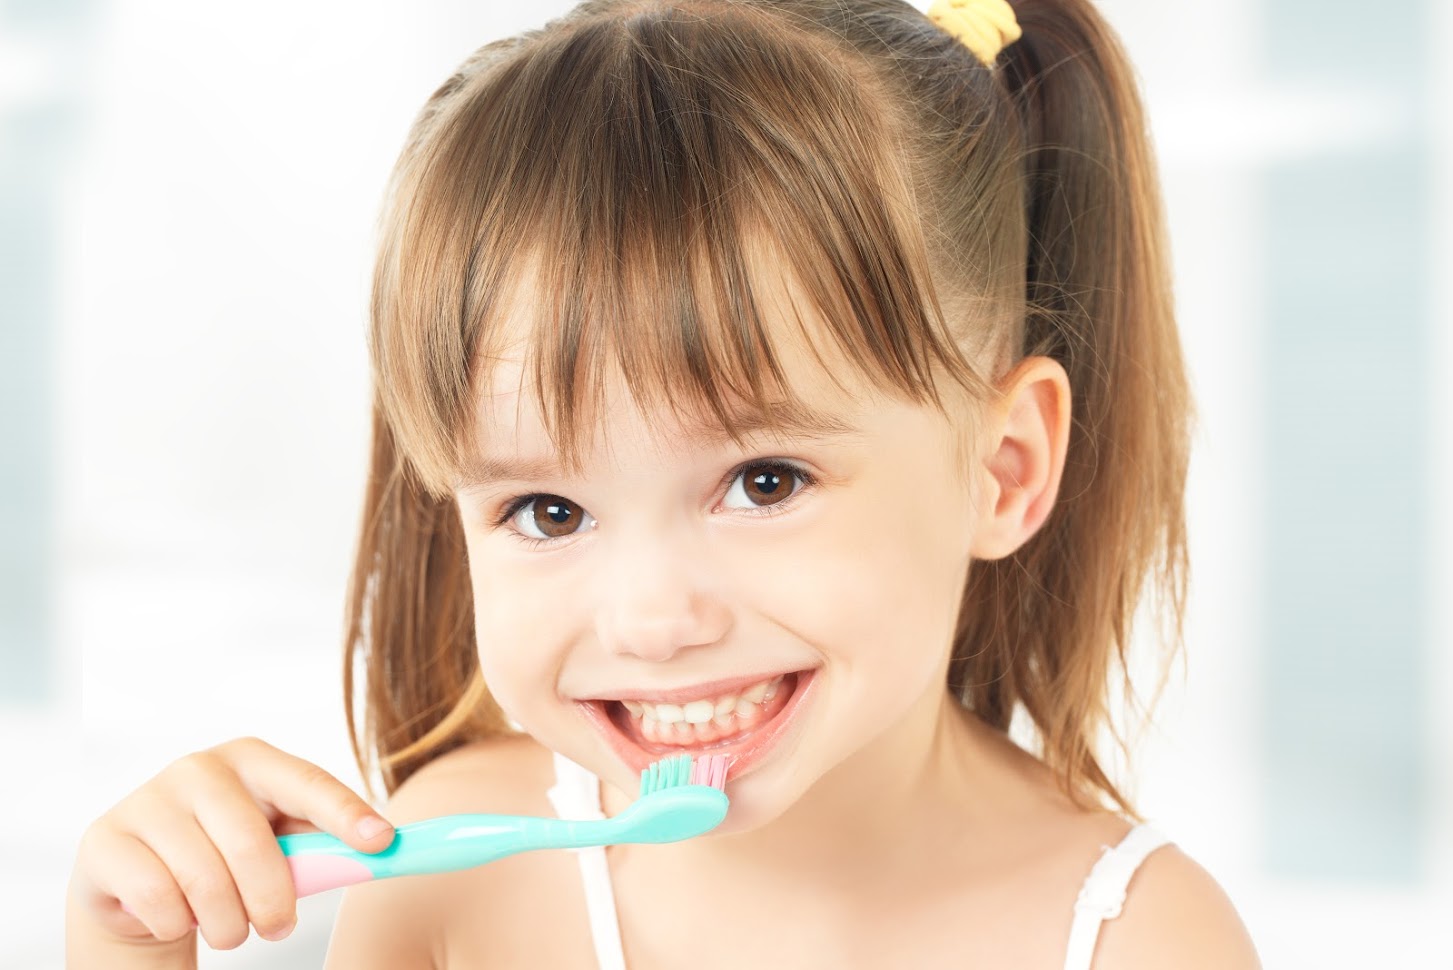 This is the image for the news article titled From Baby to Big Kid: A Tooth Care Timeline for Your Child